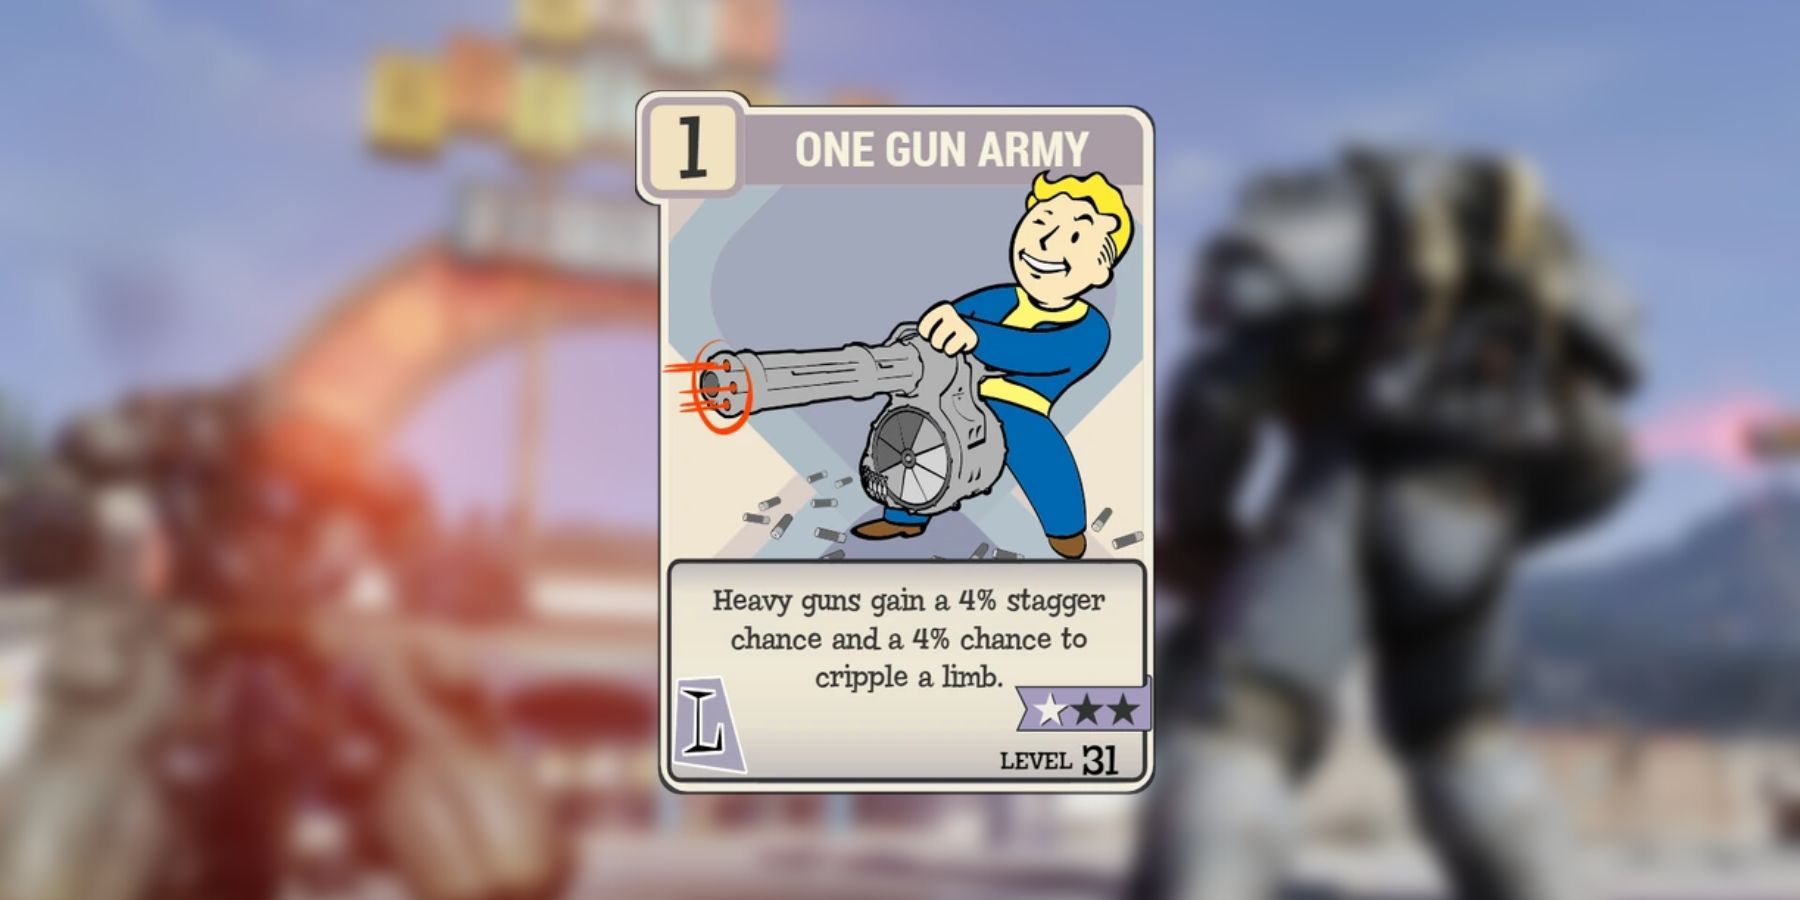 image showing the one gun army perk card for power armor.